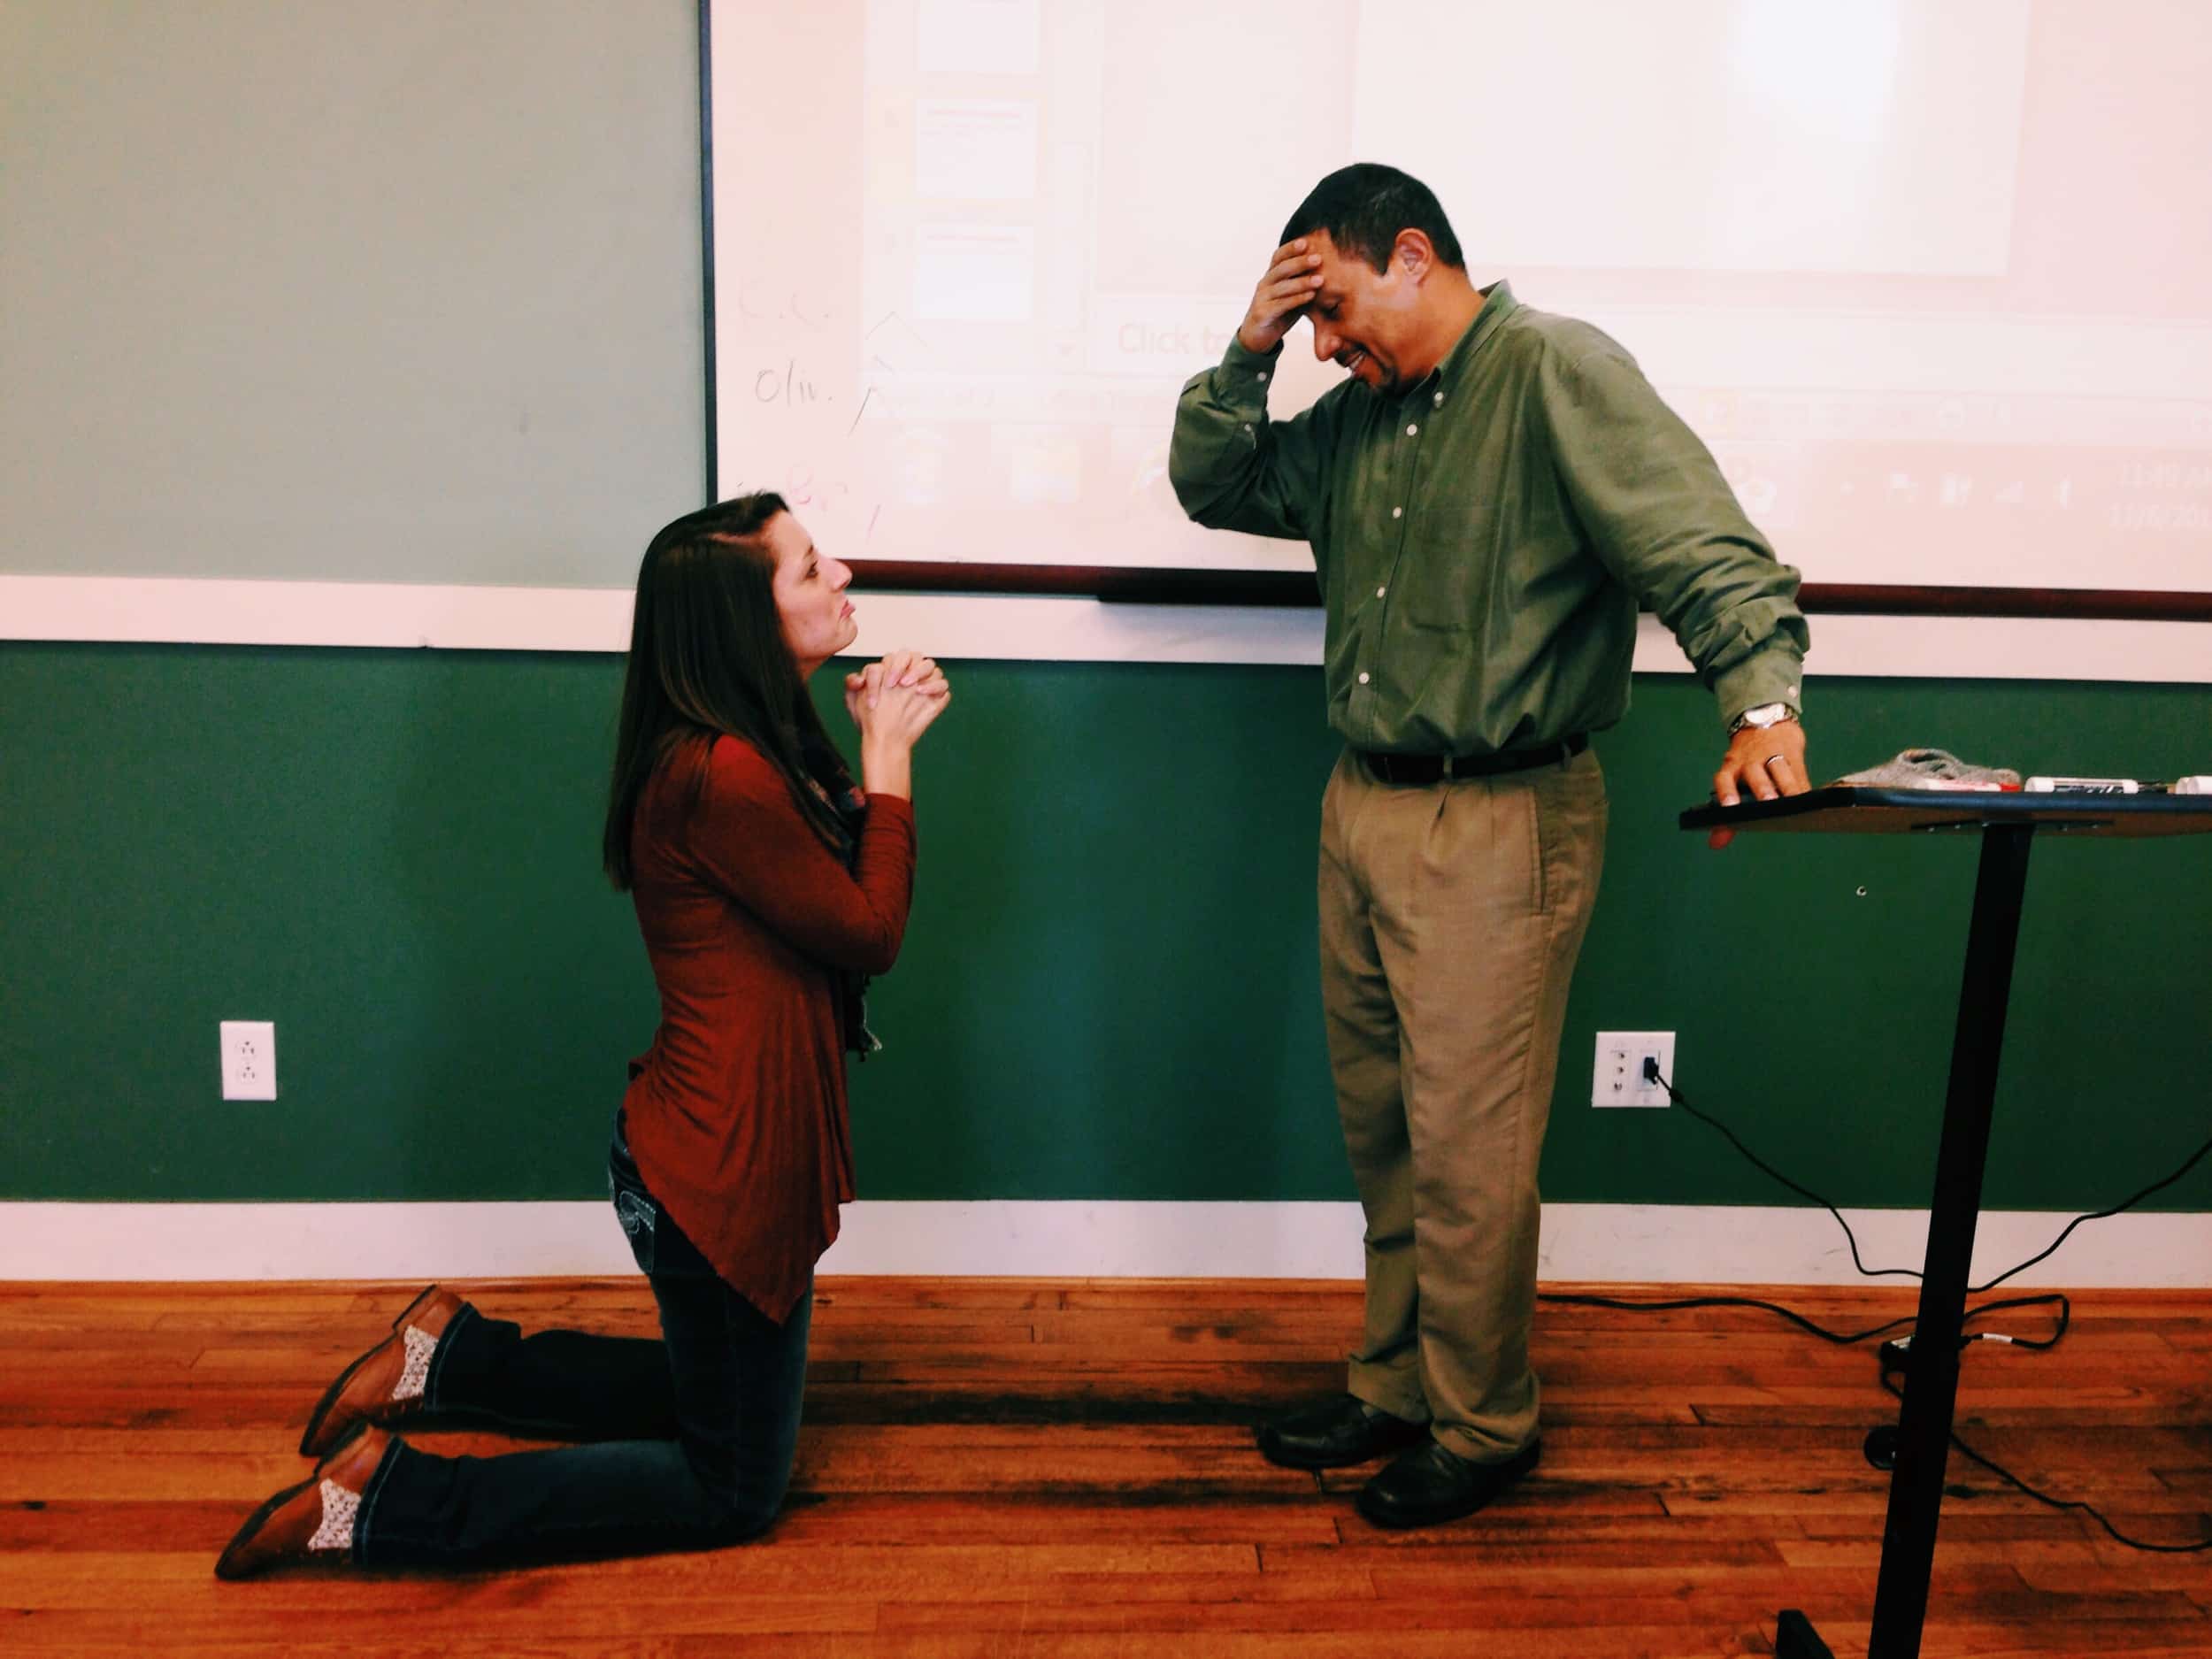 Victor Prieto brings Hannah Mashburn to tears as she begs for a chance to make an "A" in the class.